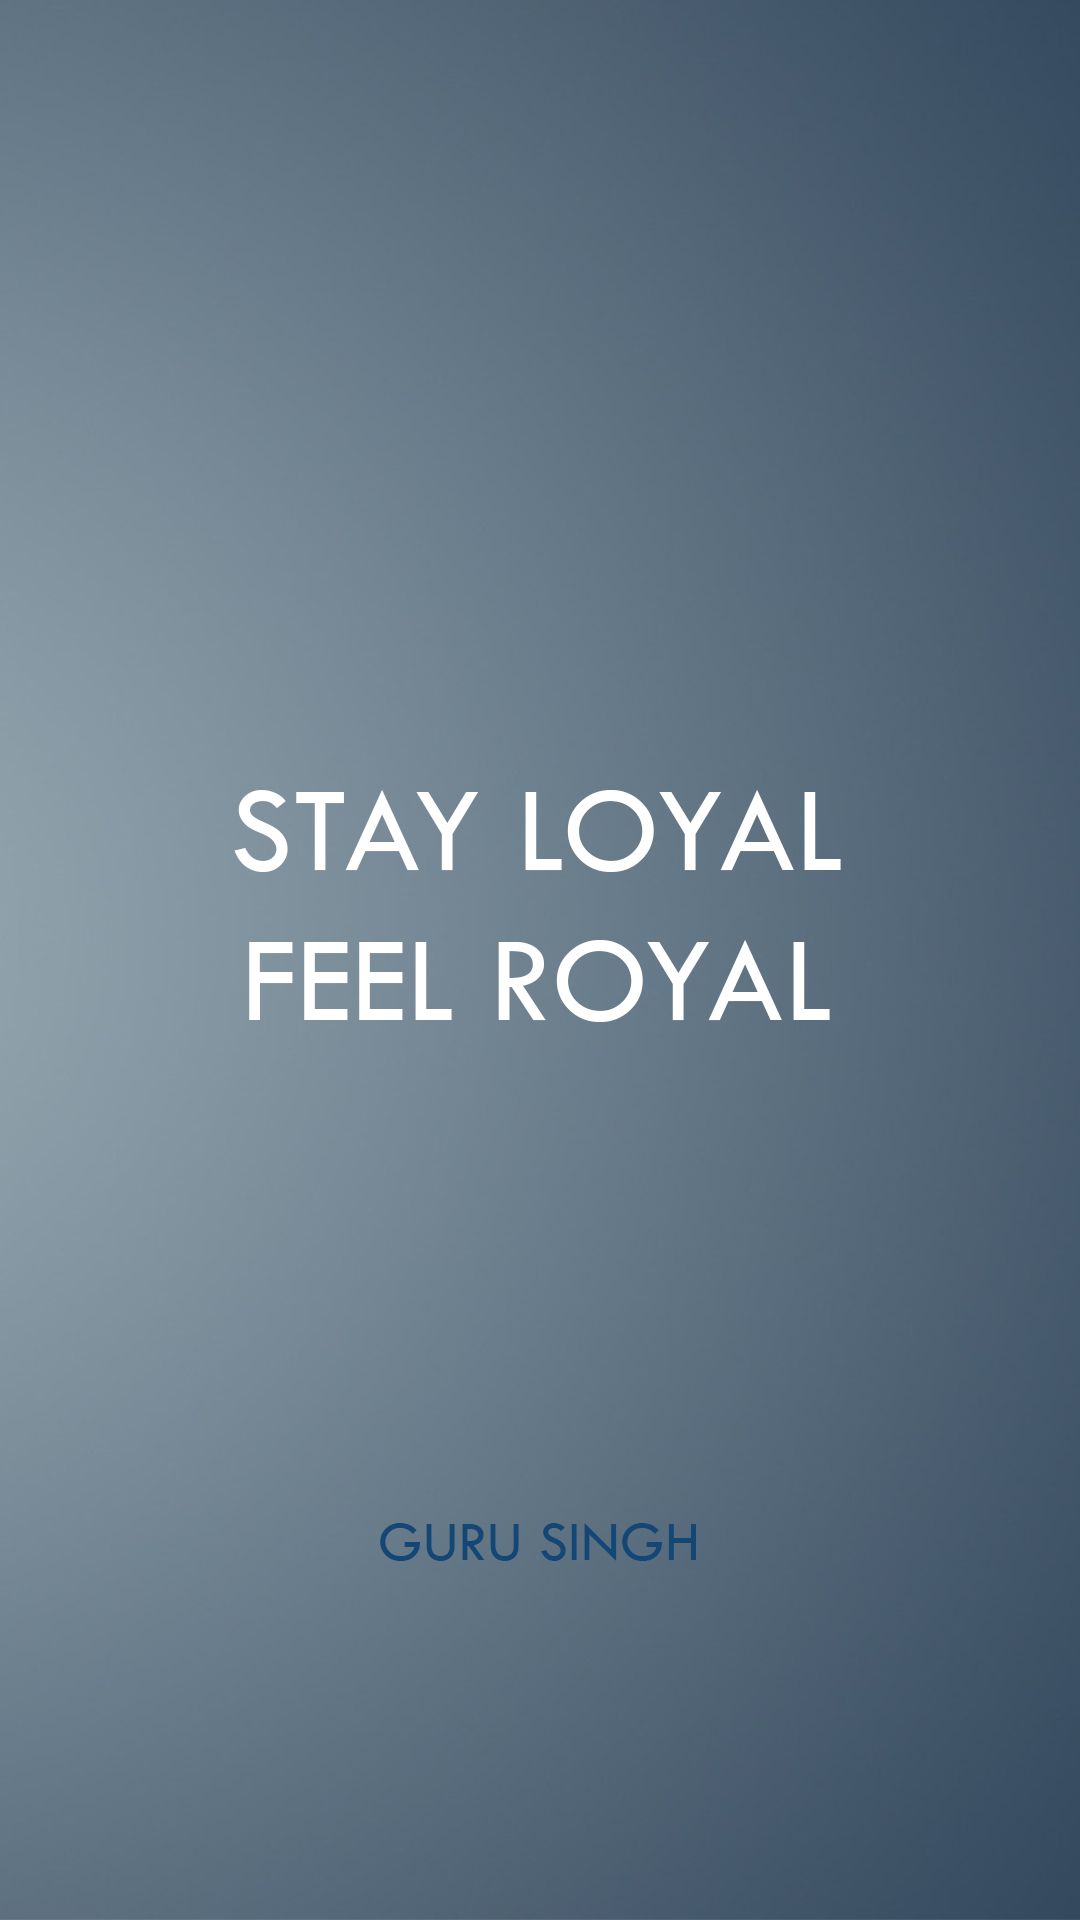 free-download-stay-loyal-feel-royal-iphone-wallpapers-stay-loyal-gs